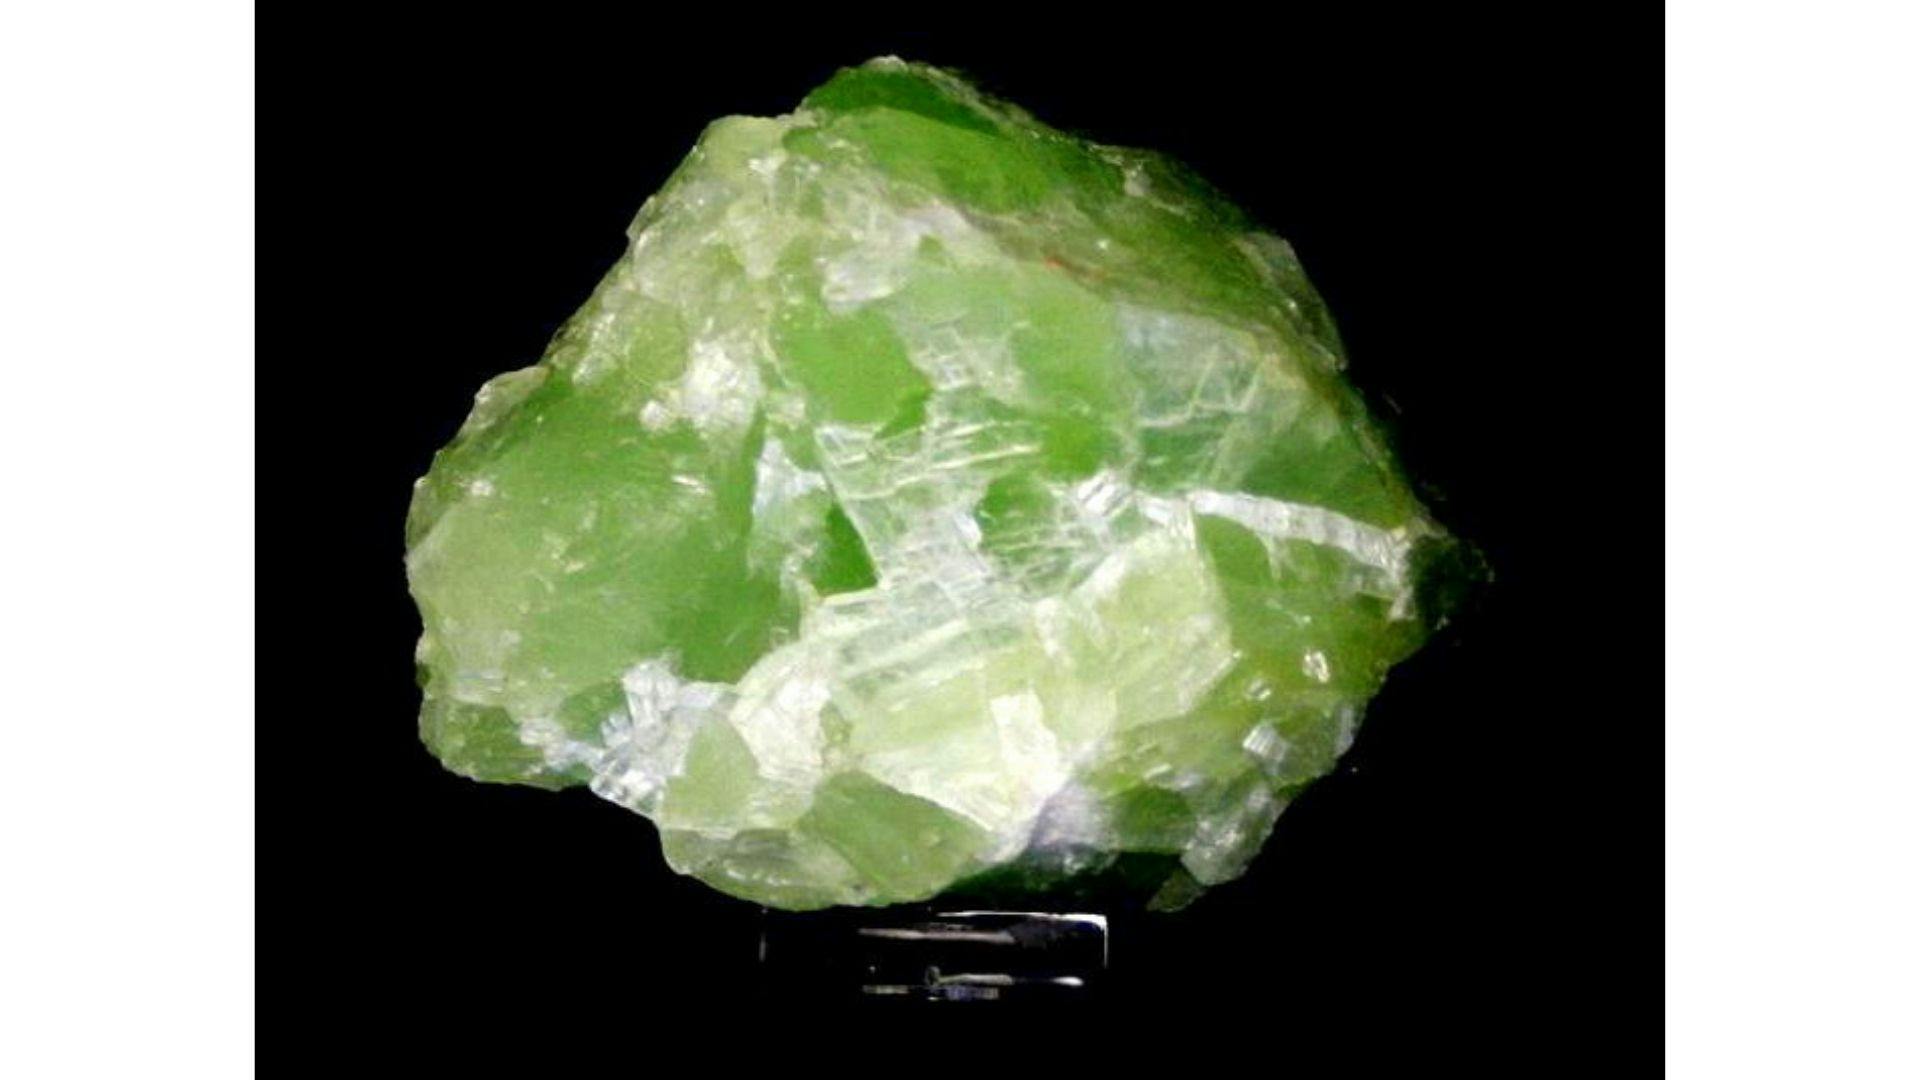 Hislopite, a bright green variety of calcite, named after Hislop